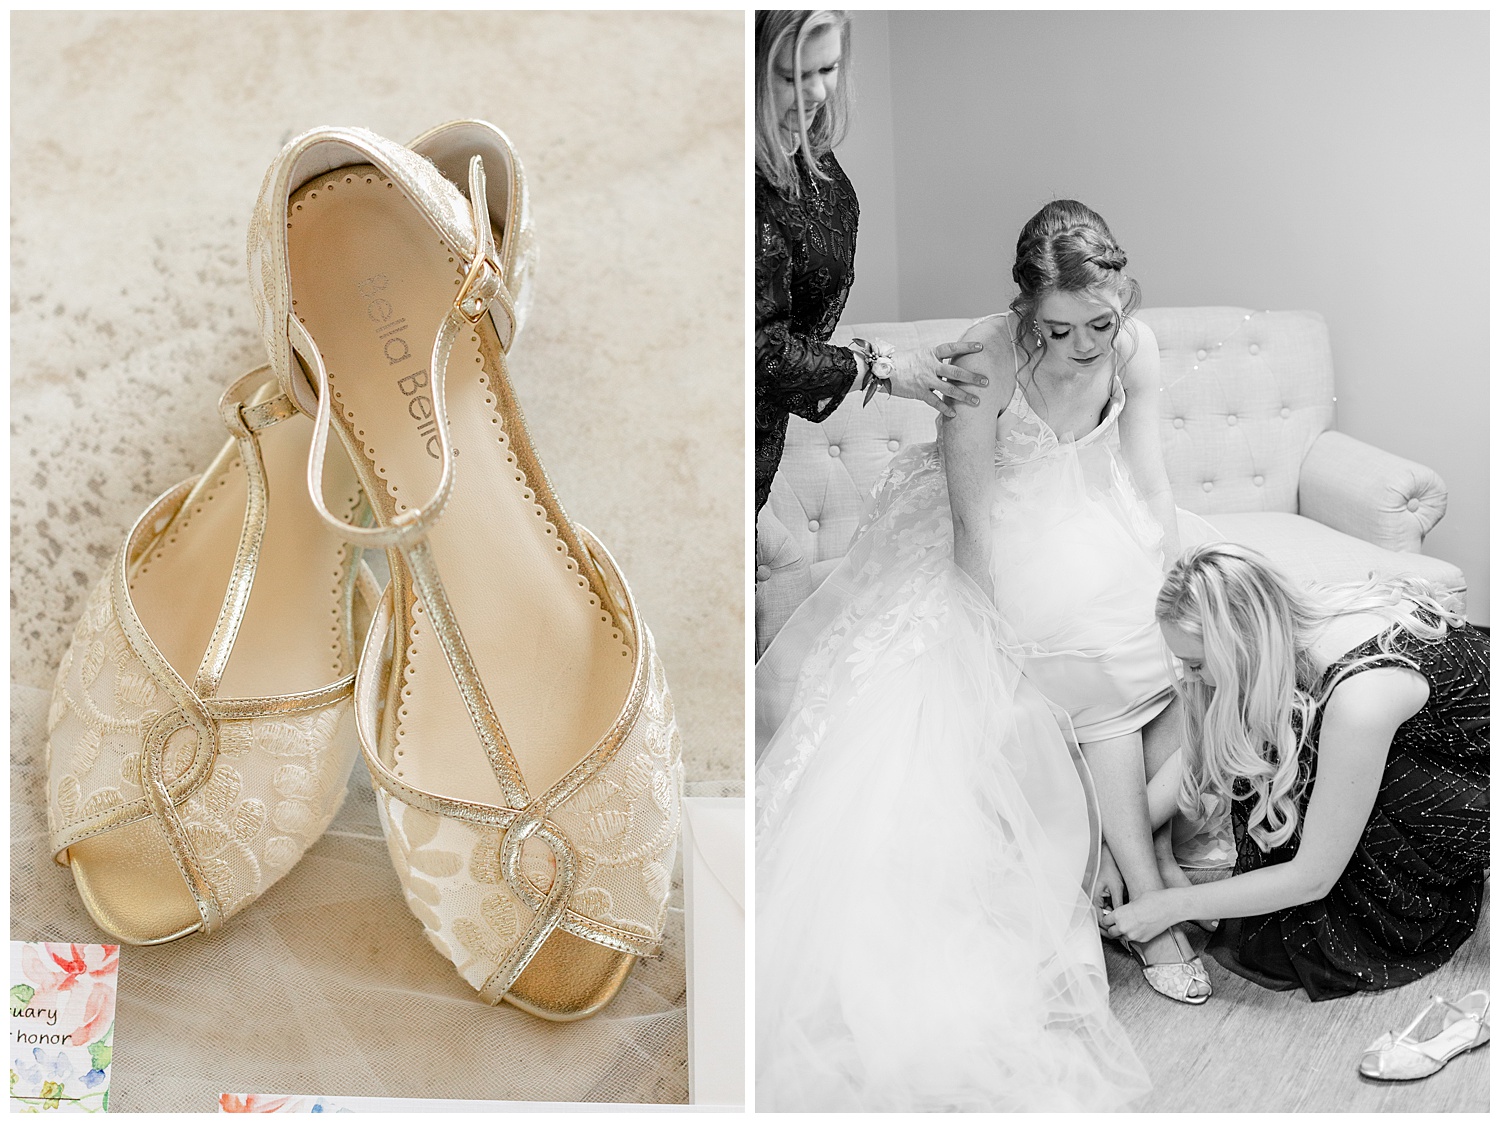 Bride getting her shoes on before her rainy wedding.